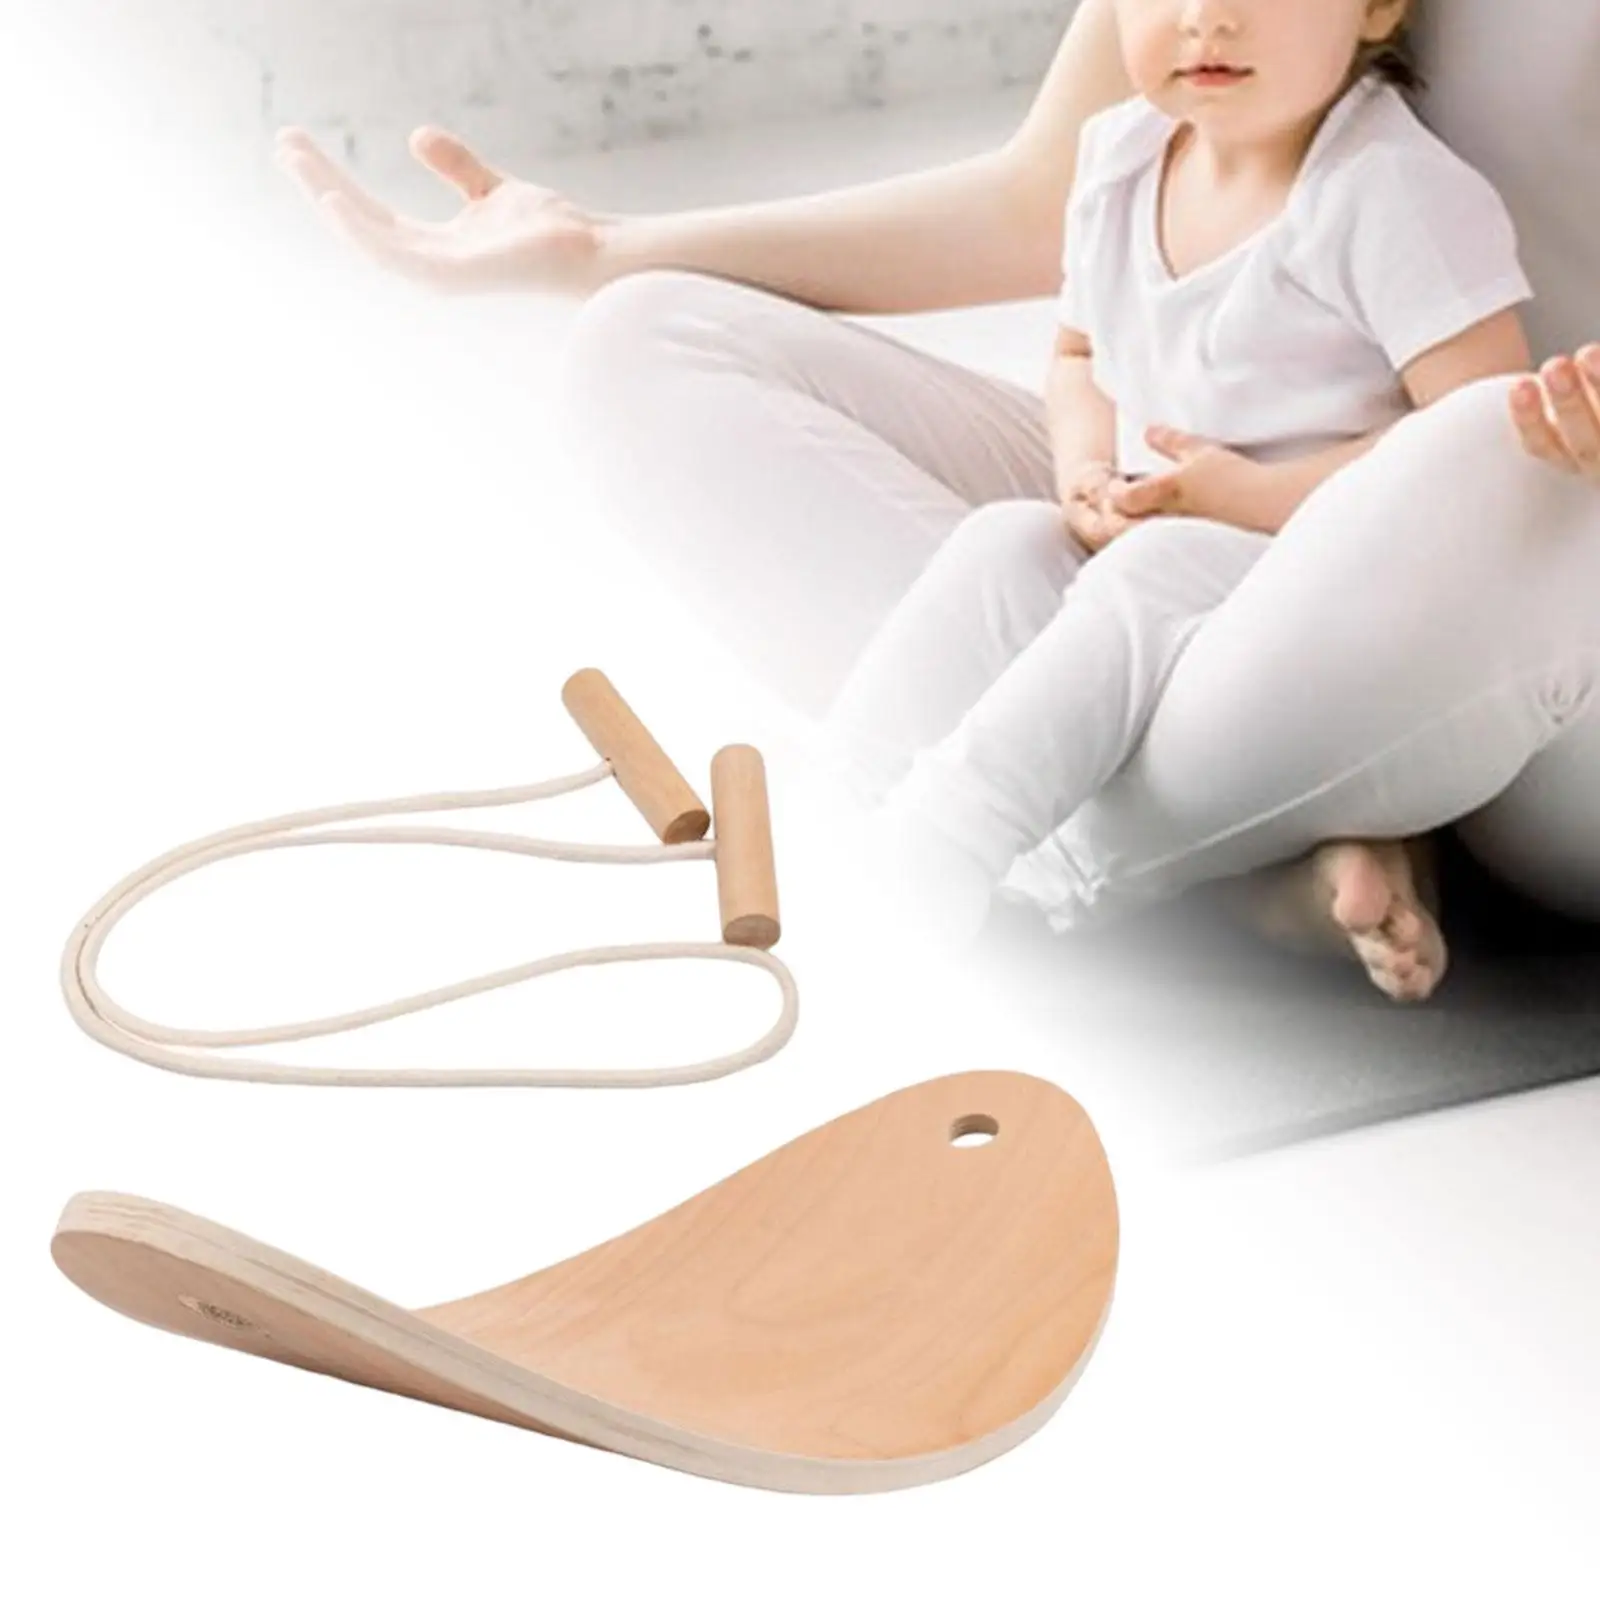 Wooden Balance Board Toy Seesaw Workout Body Training for Indoor